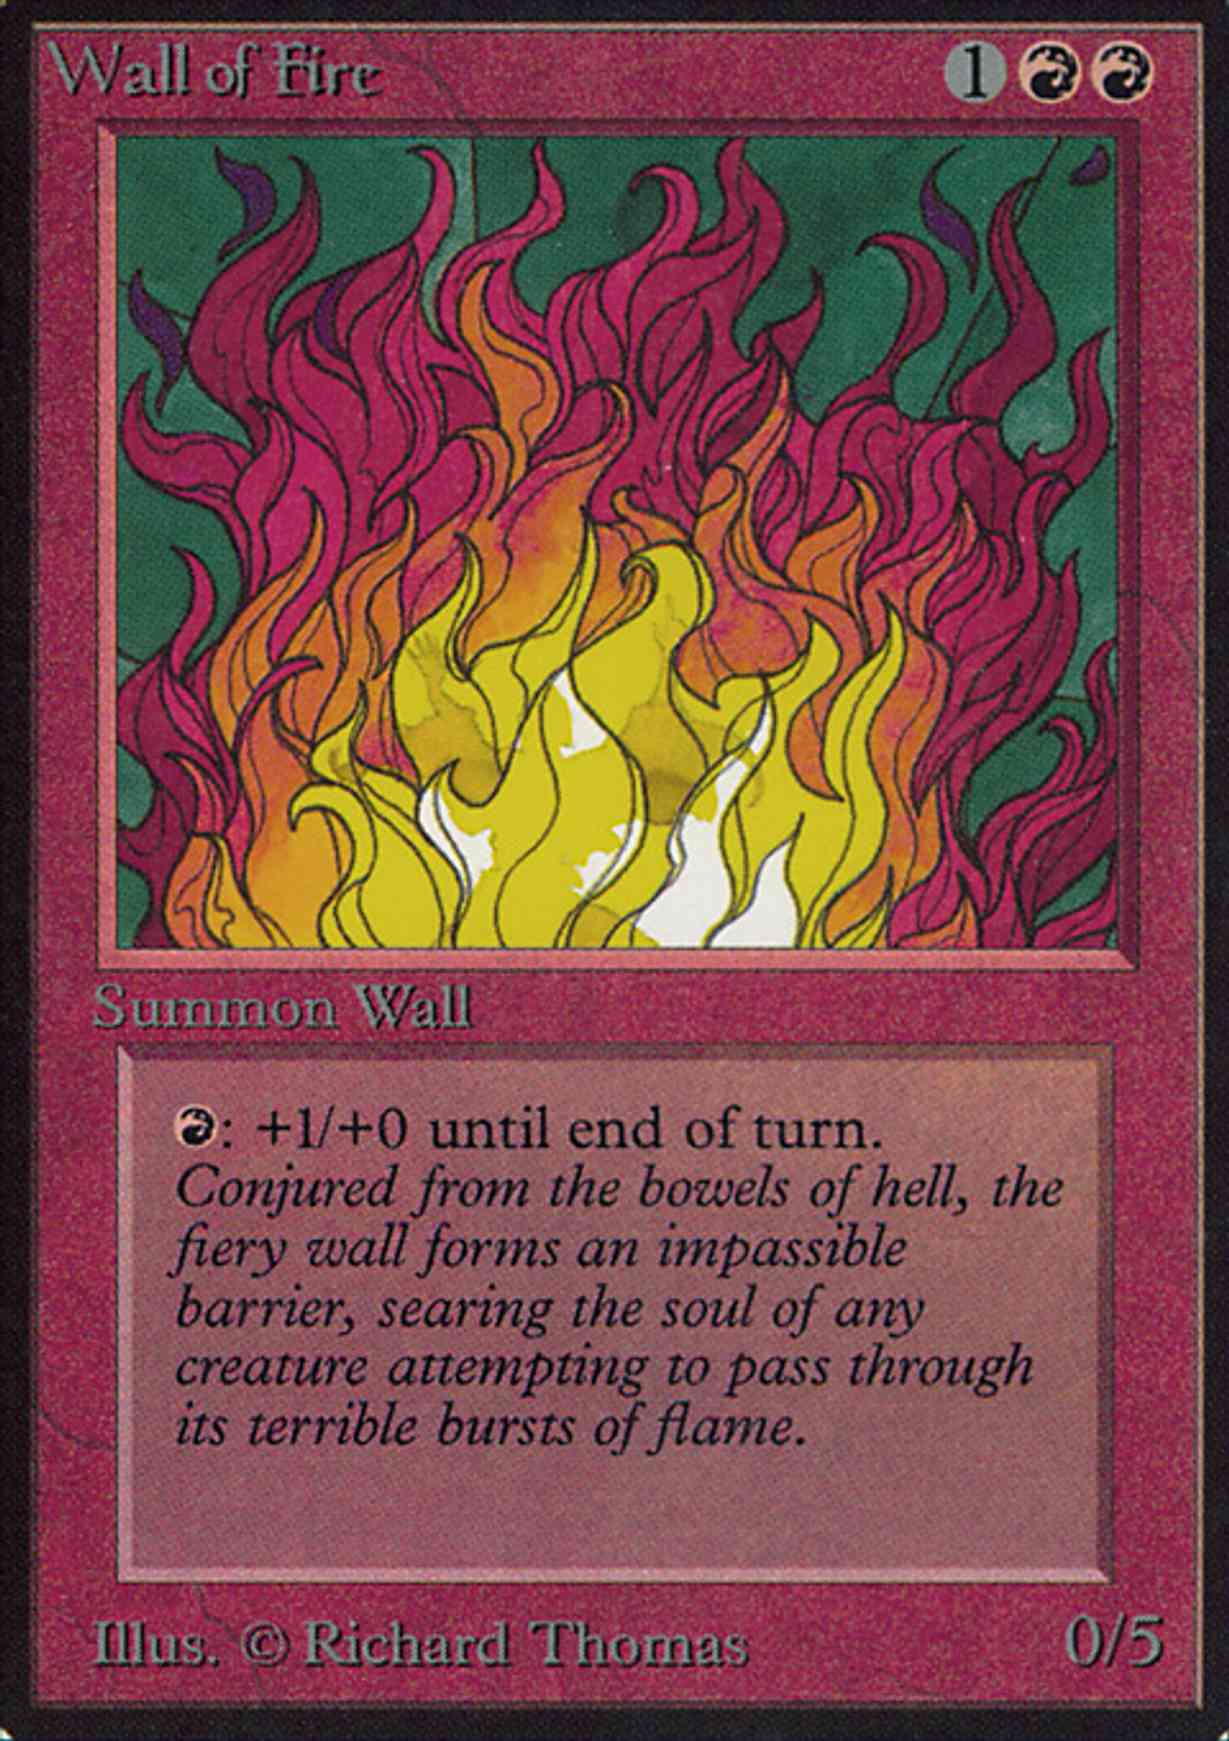 Wall of Fire magic card front